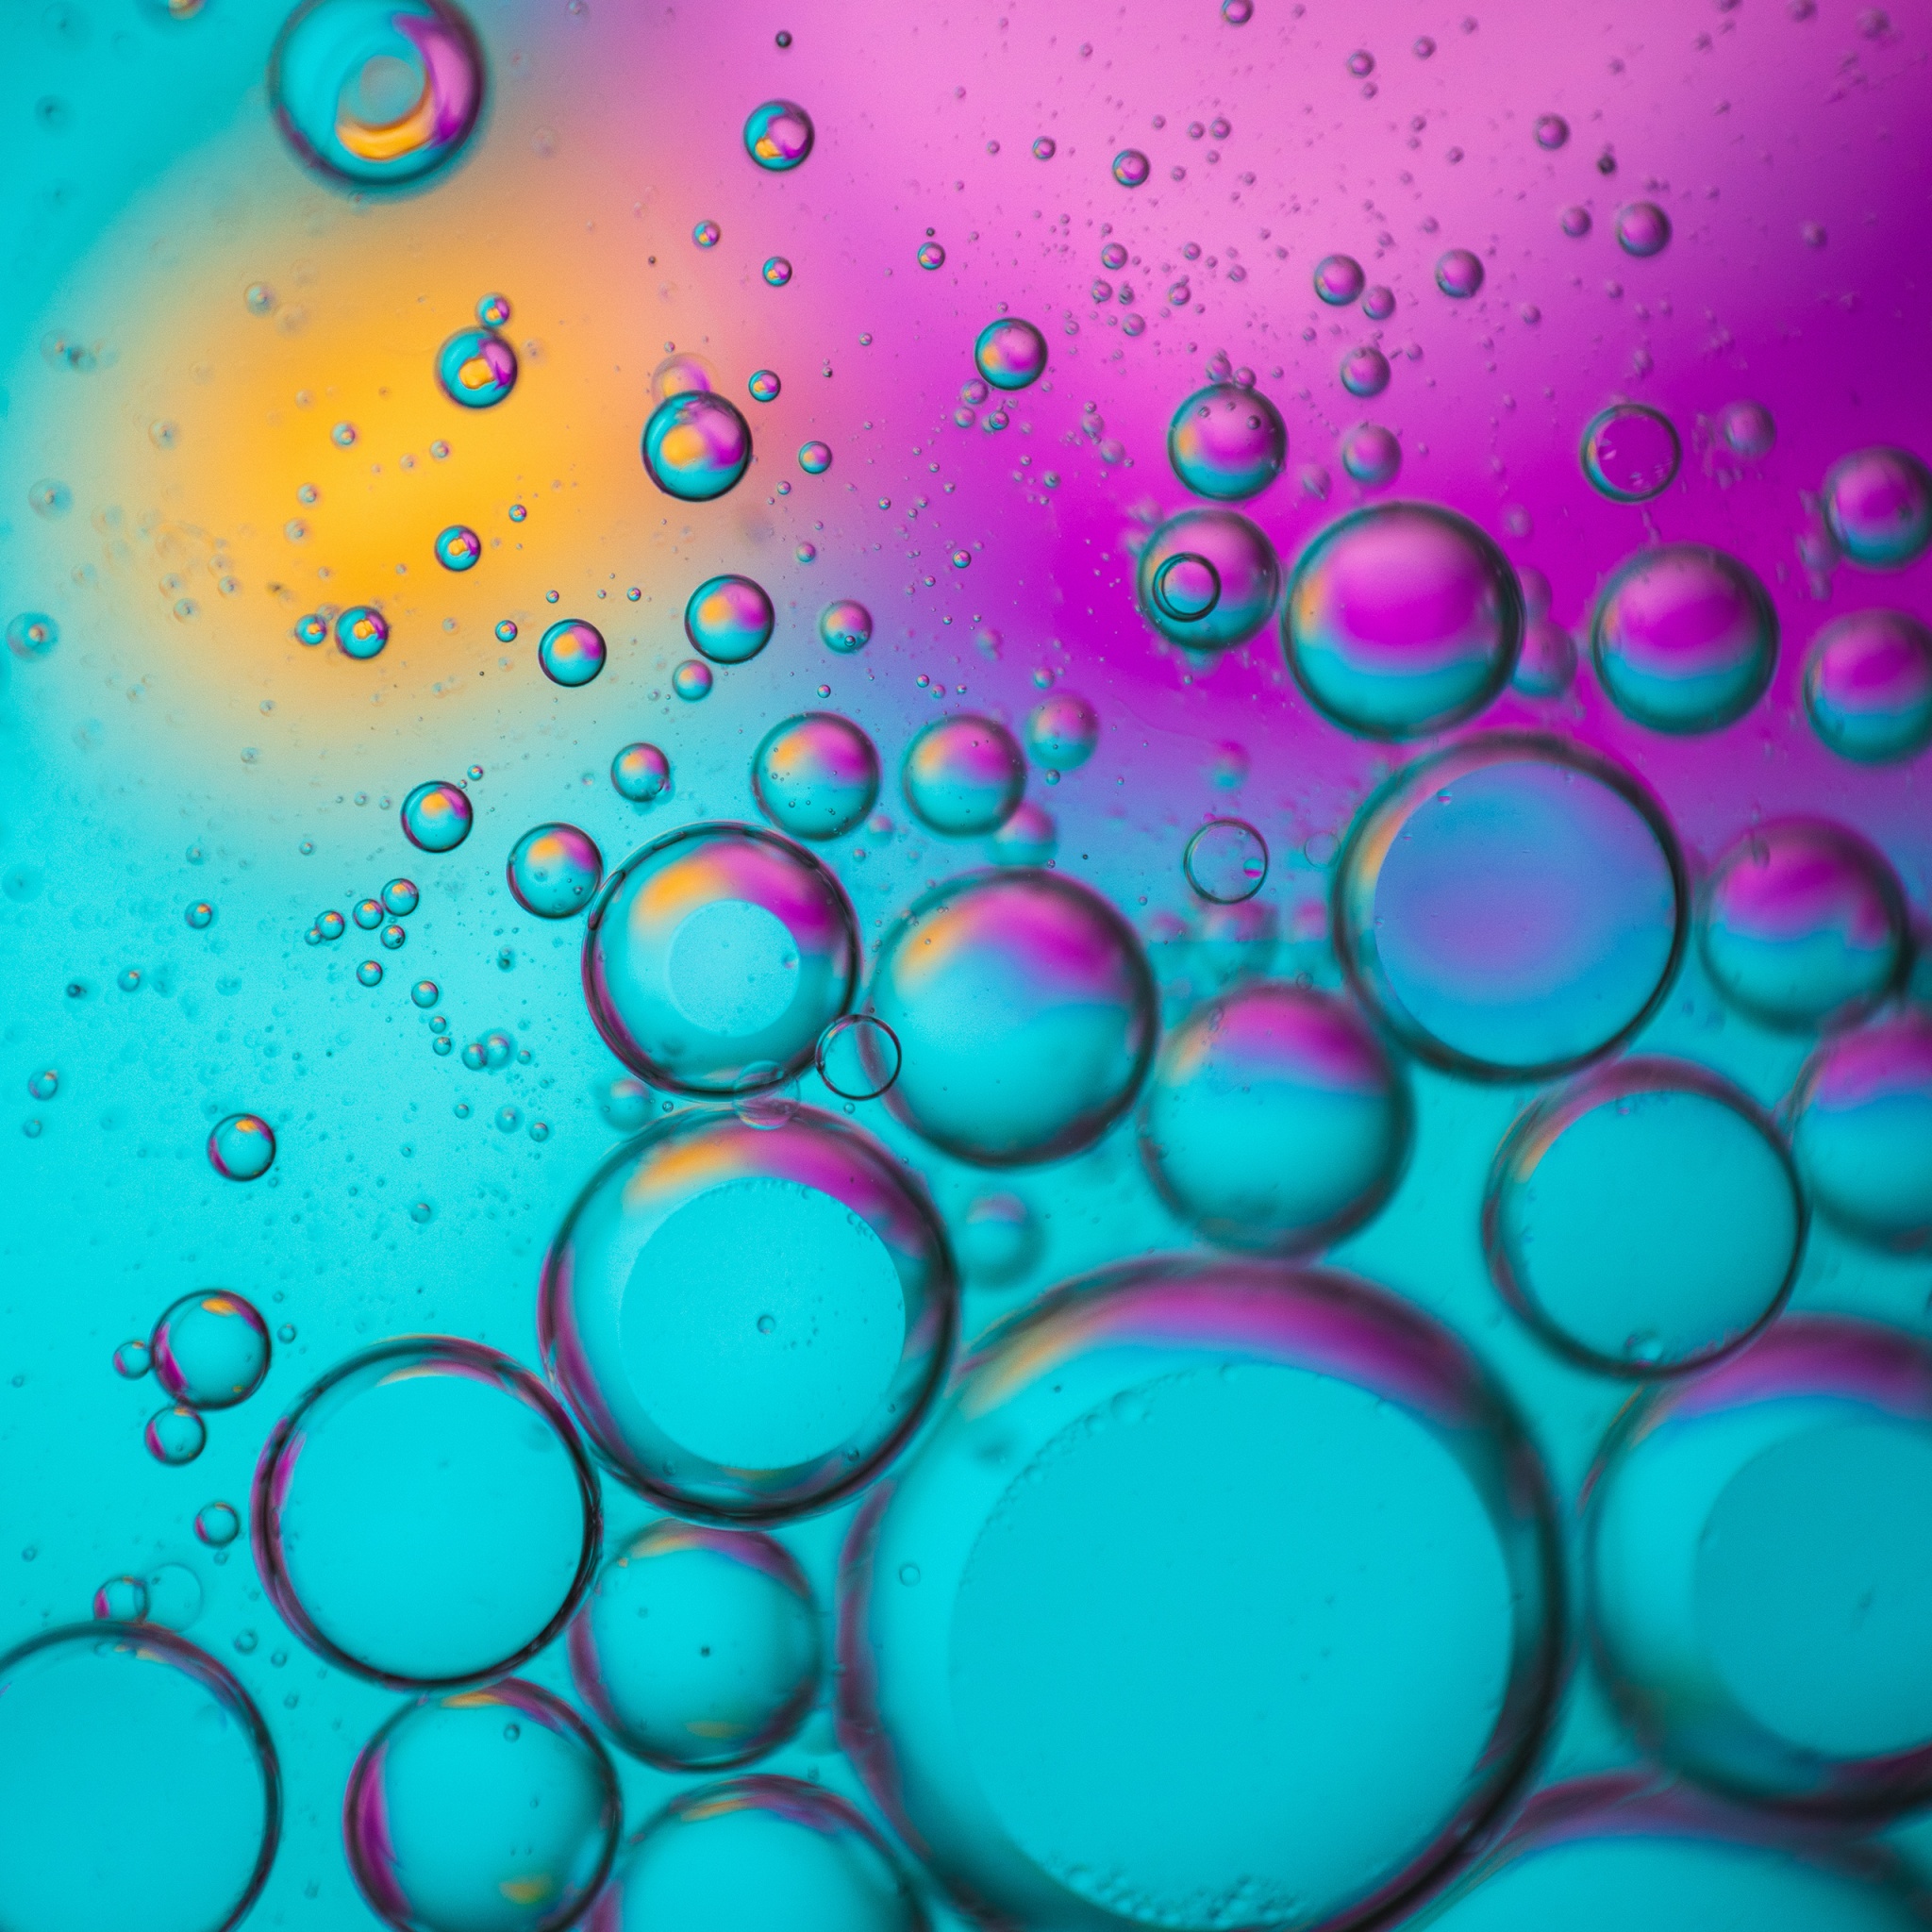 Neon Bubbles Wallpapers  HD Wallpapers  ID 24708